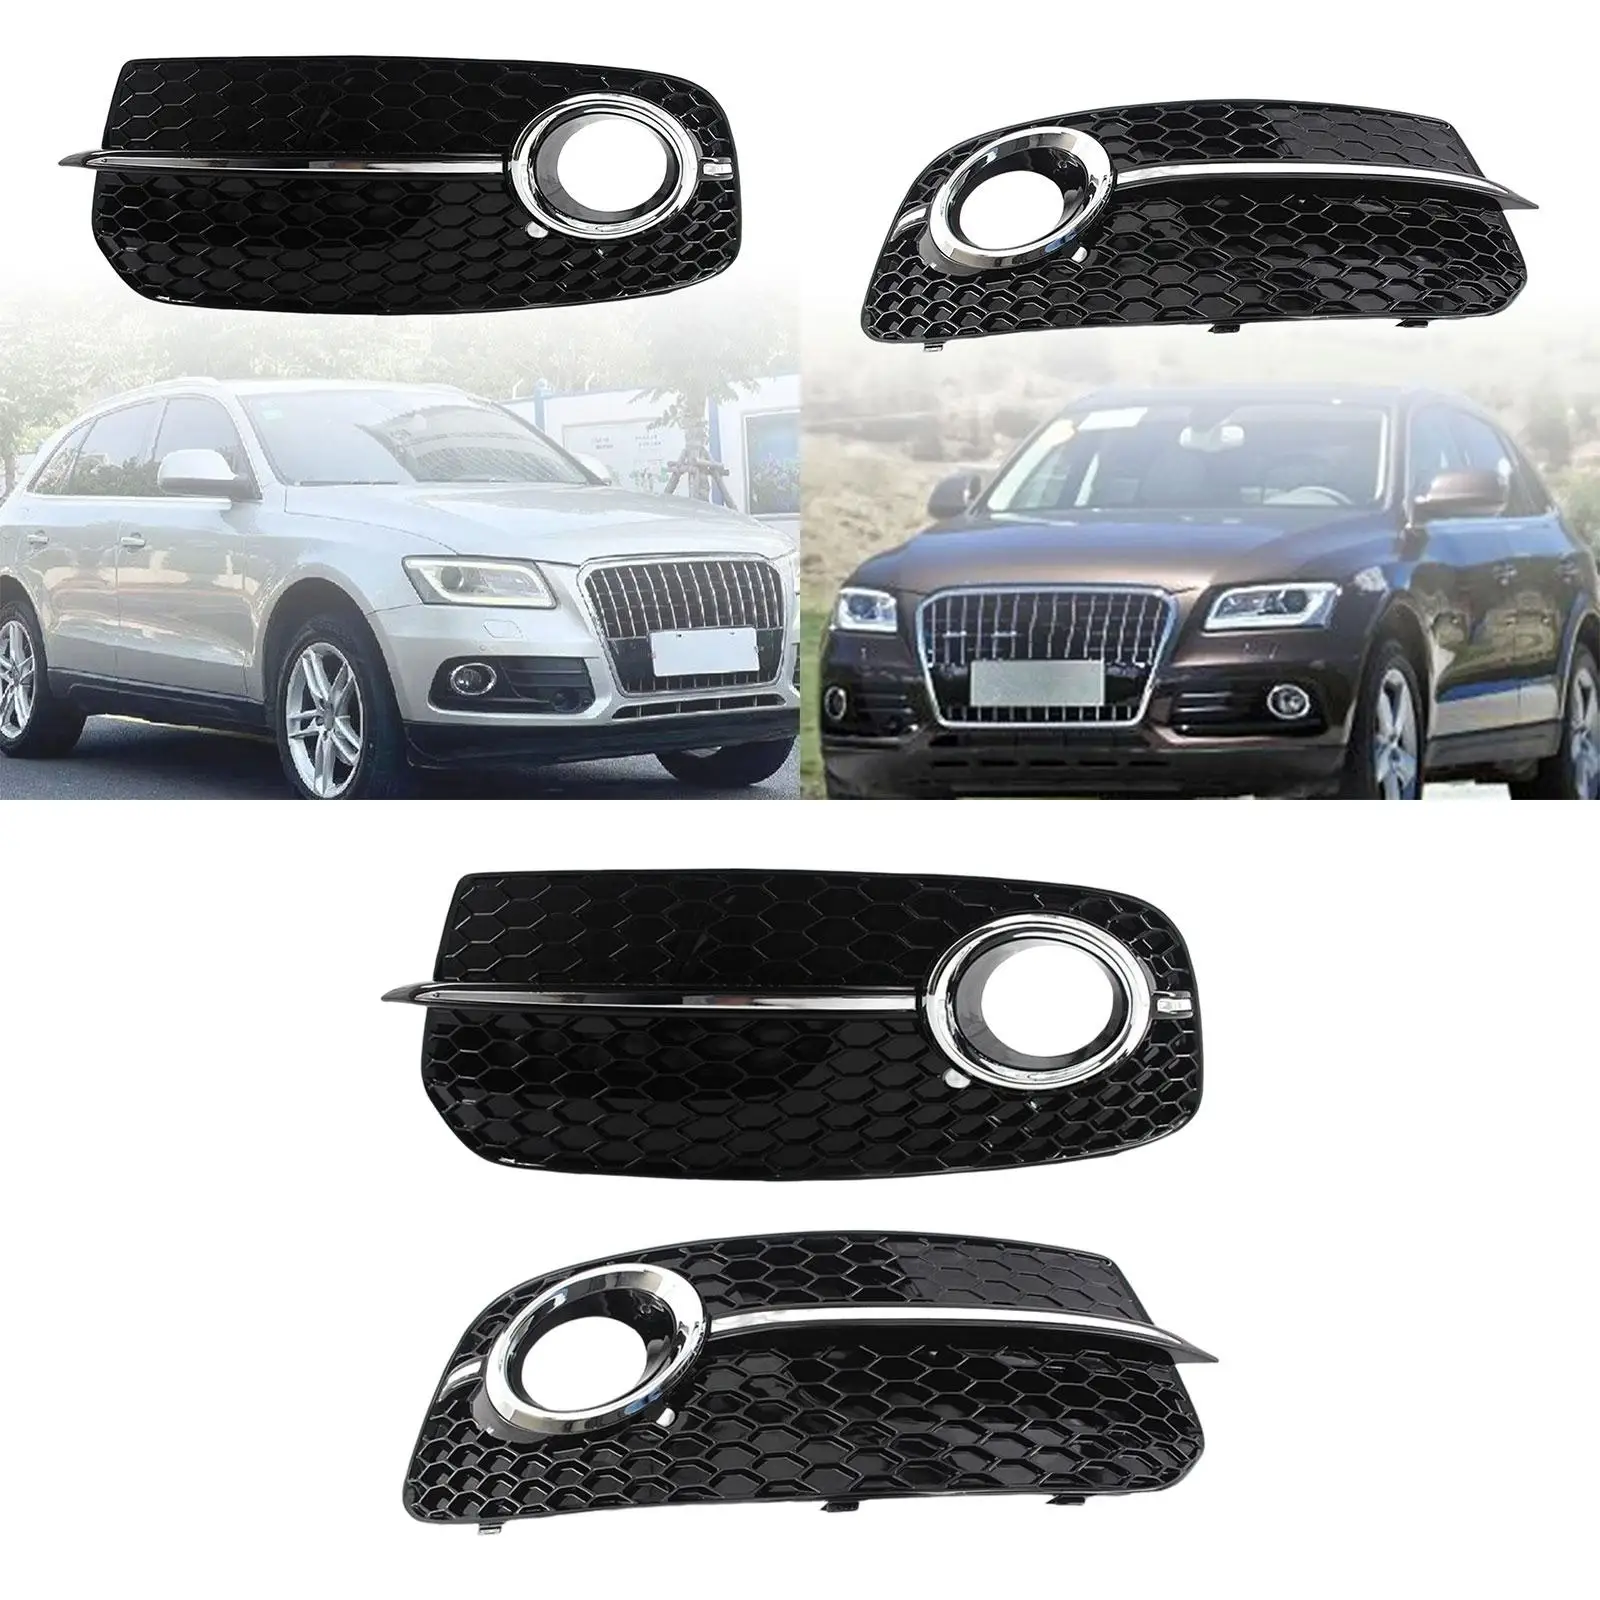 Fog Light Grill Grille Cover Automobile Direct Replaces Professional Durable for Audi Q5 2013-16 Standard Front Bumper Only